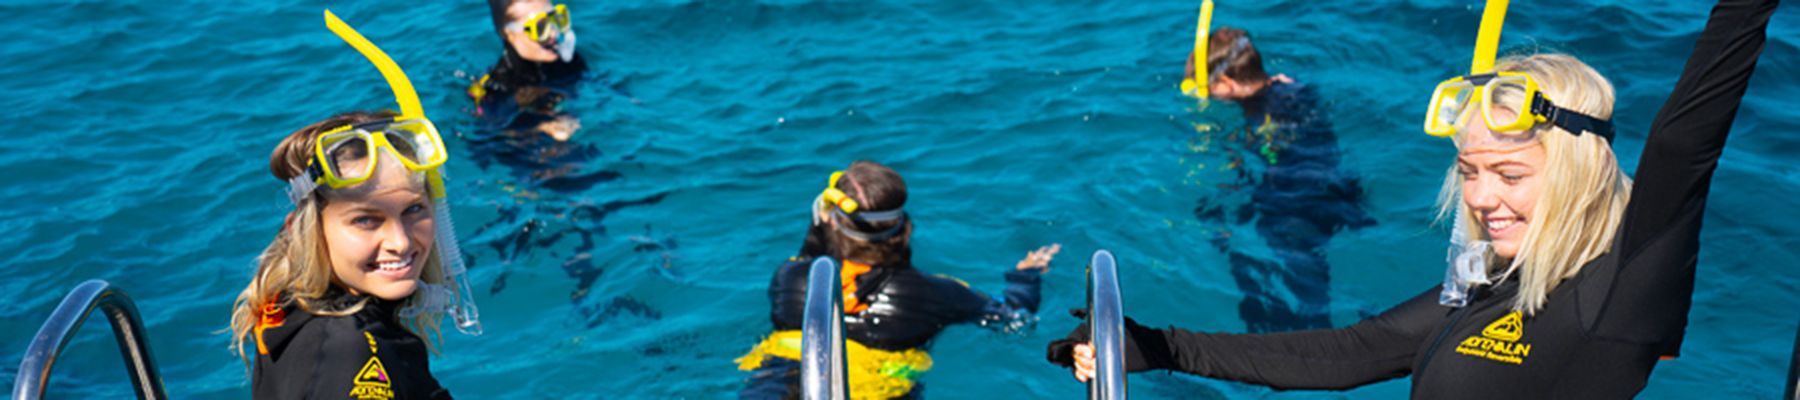 Girls in the water with wetsuits snorkelling